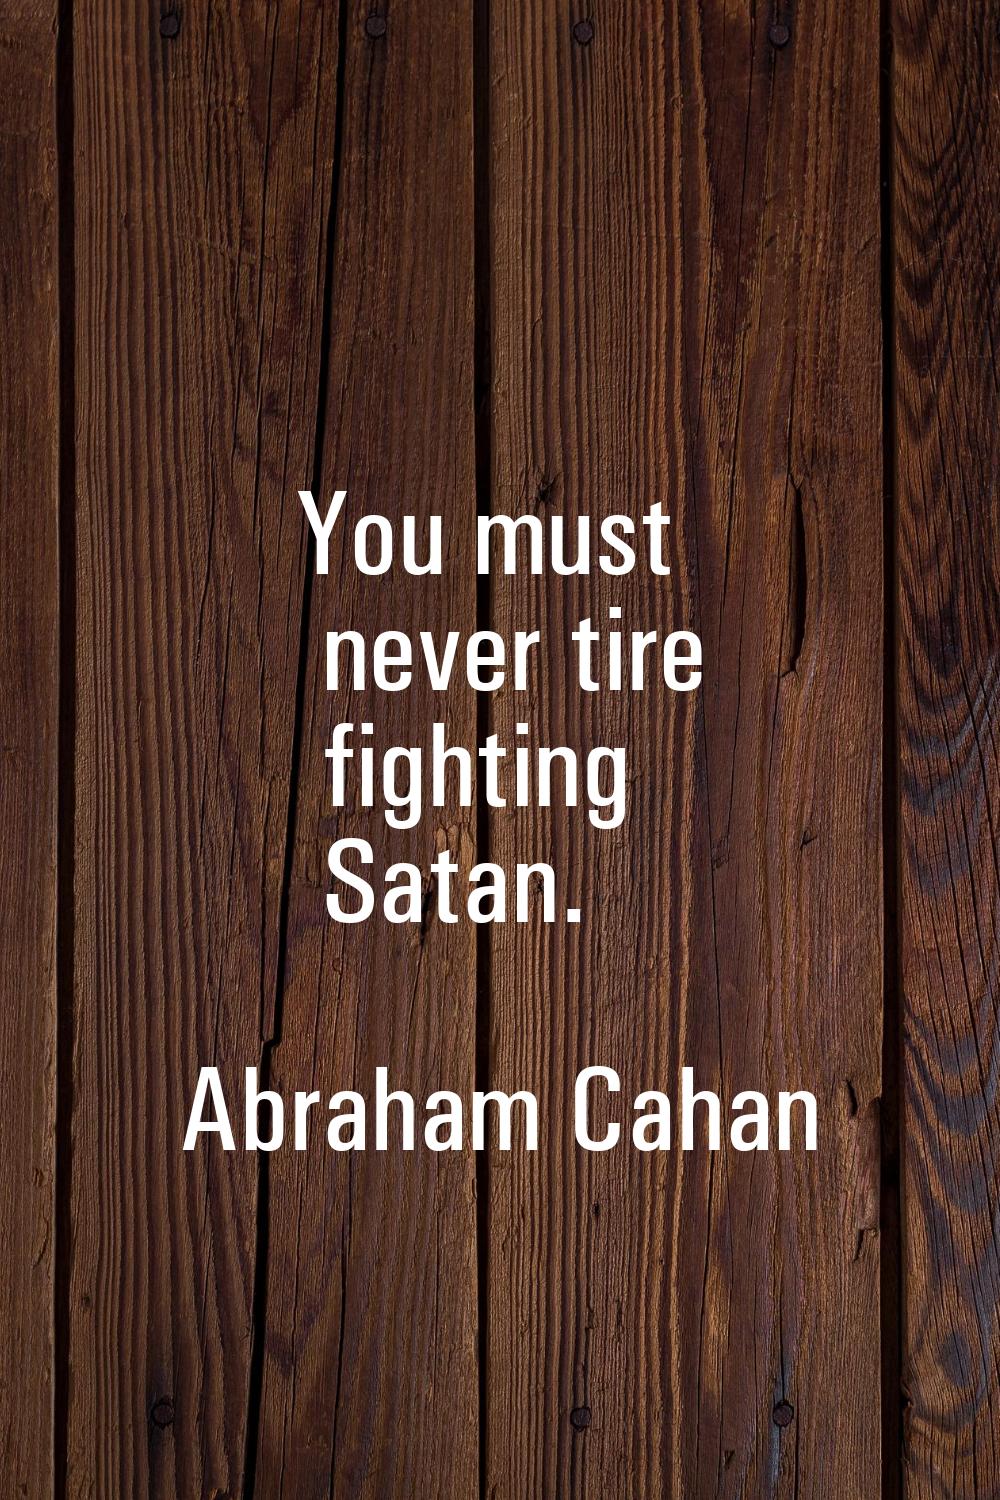 You must never tire fighting Satan.